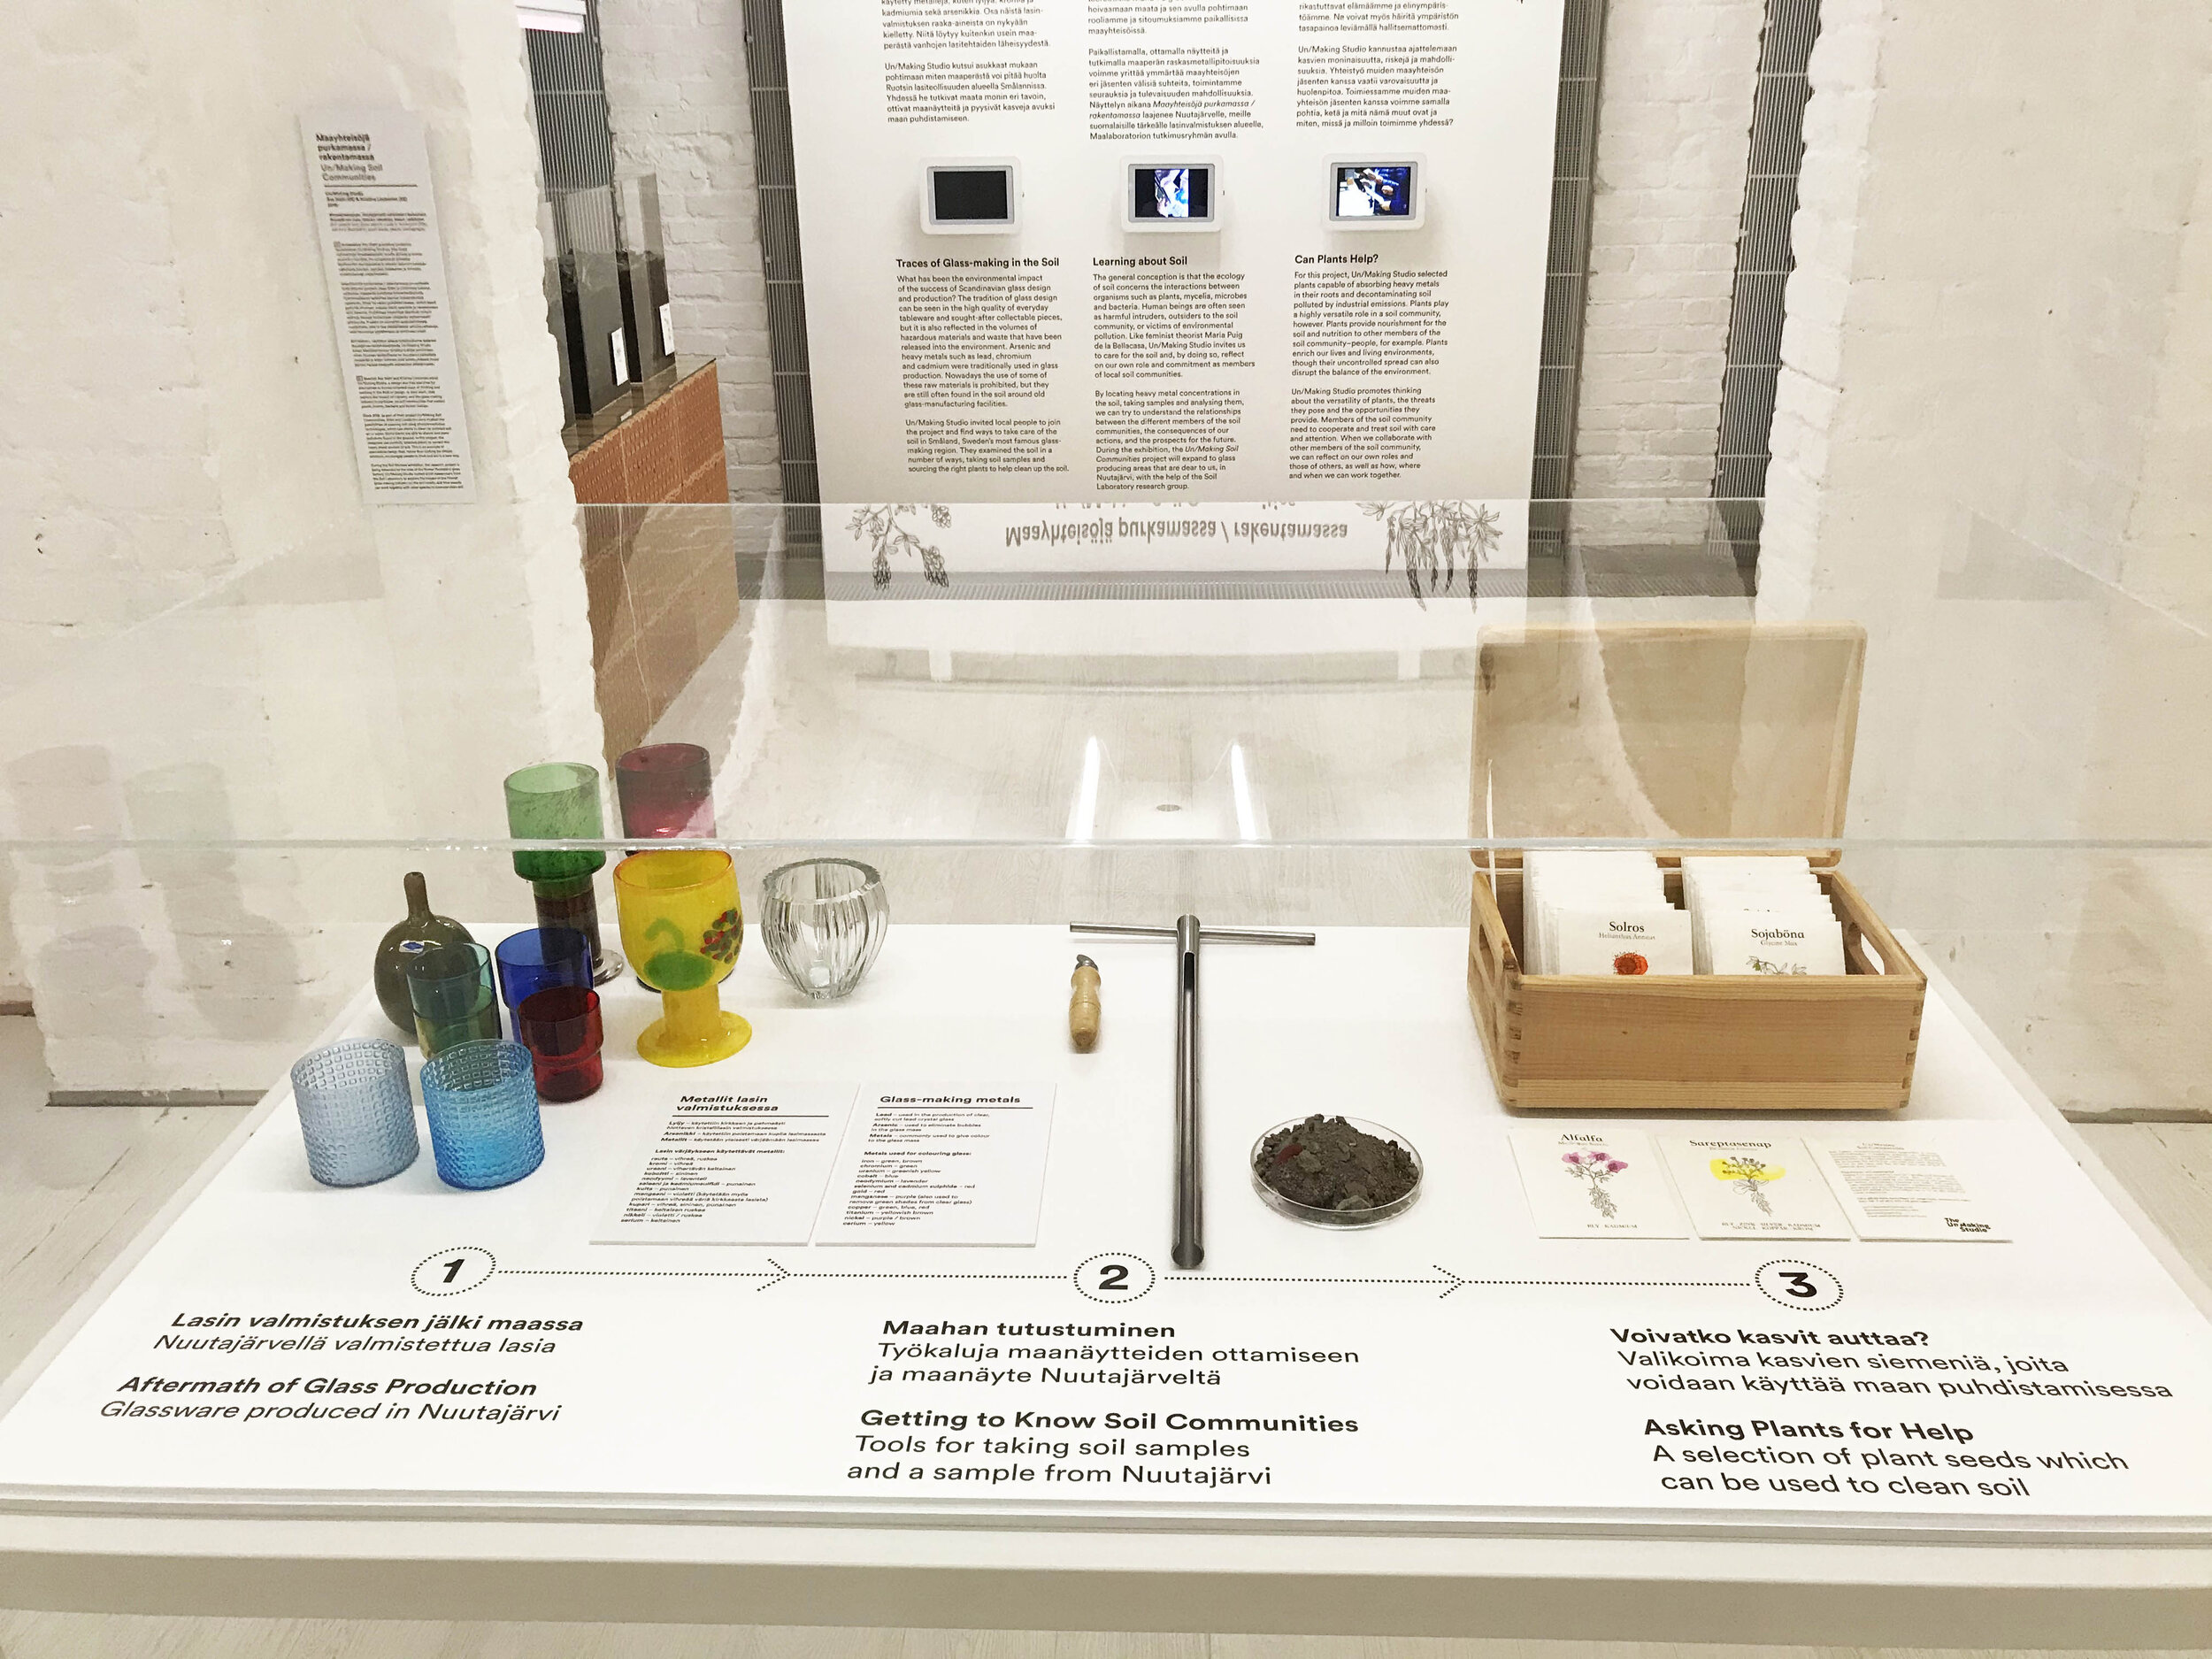   Finnish glassware produced in Nuutajärvi displayed in the exhibition space. Photo: Tzuyu Chen  